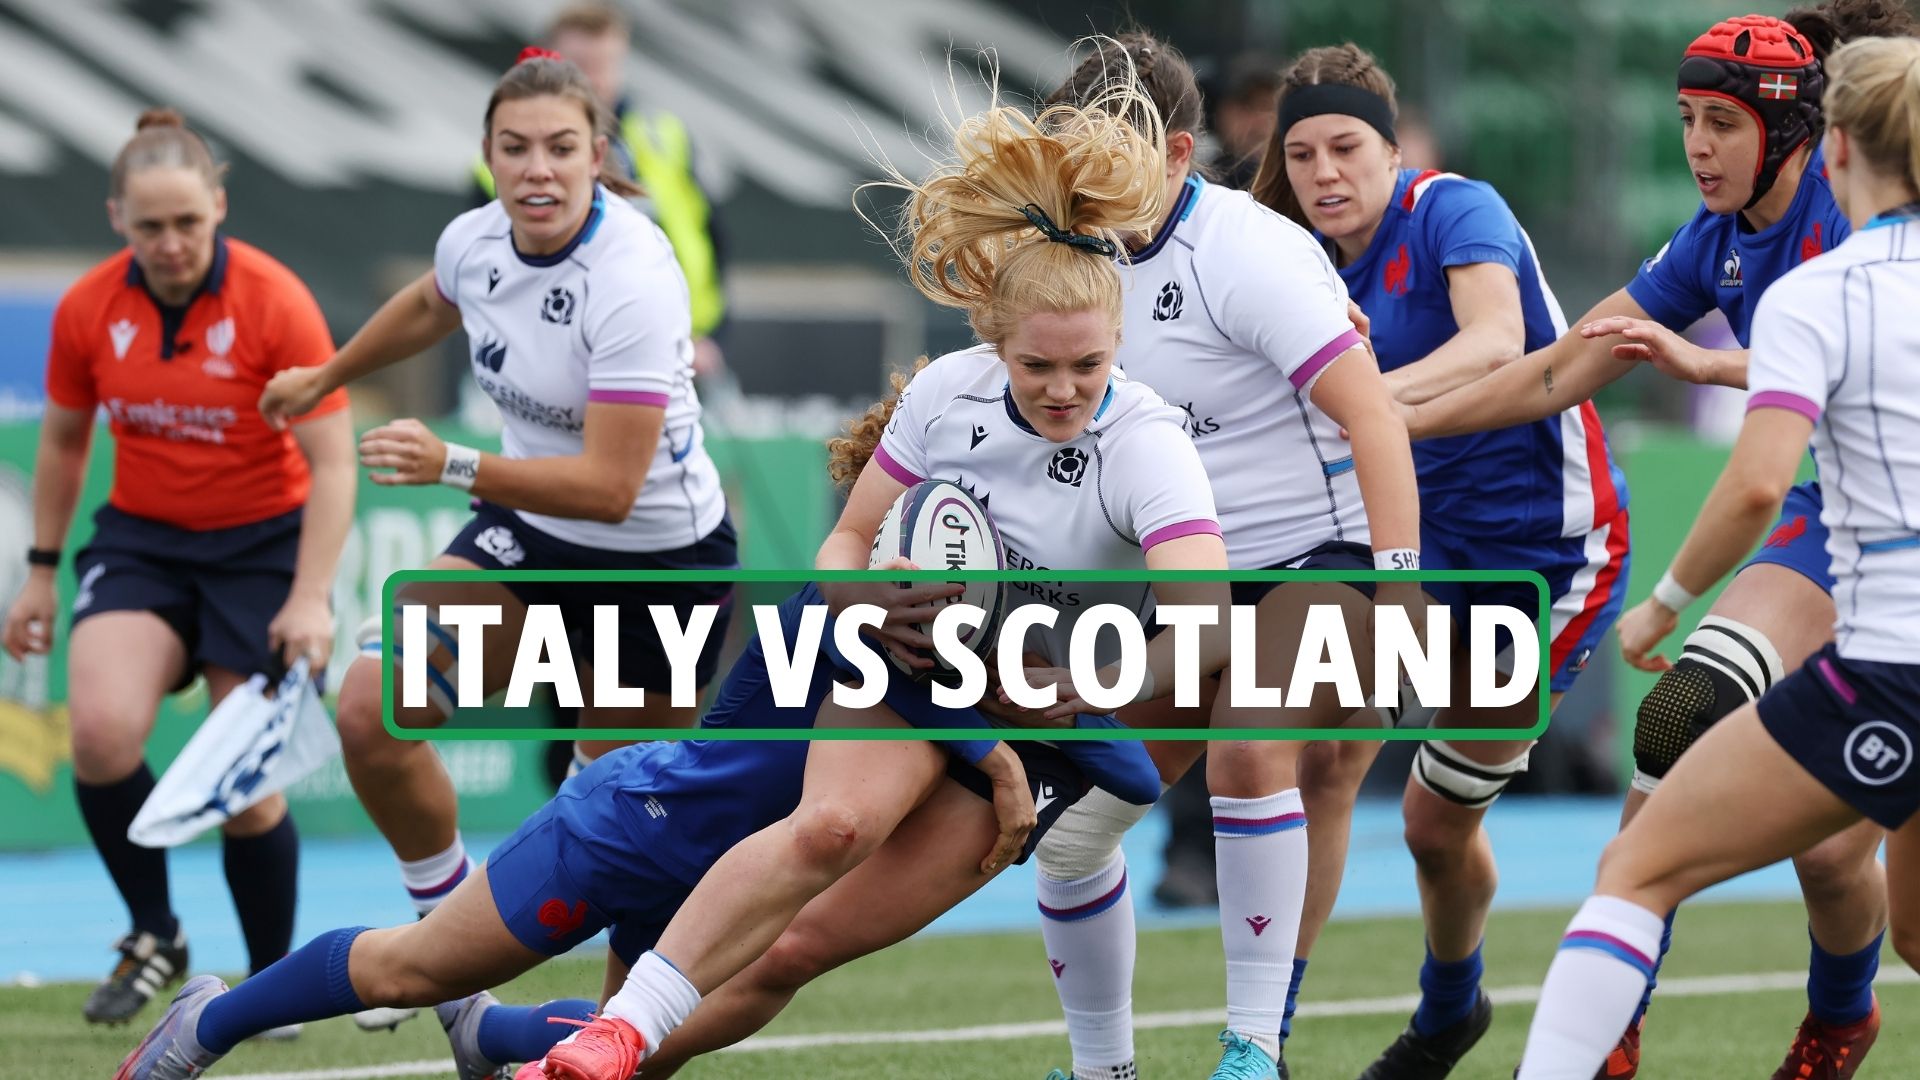 Italy vs Scotland rugby: Live stream FREE, TV channel, kick-off time, teams for Women's Six Nations